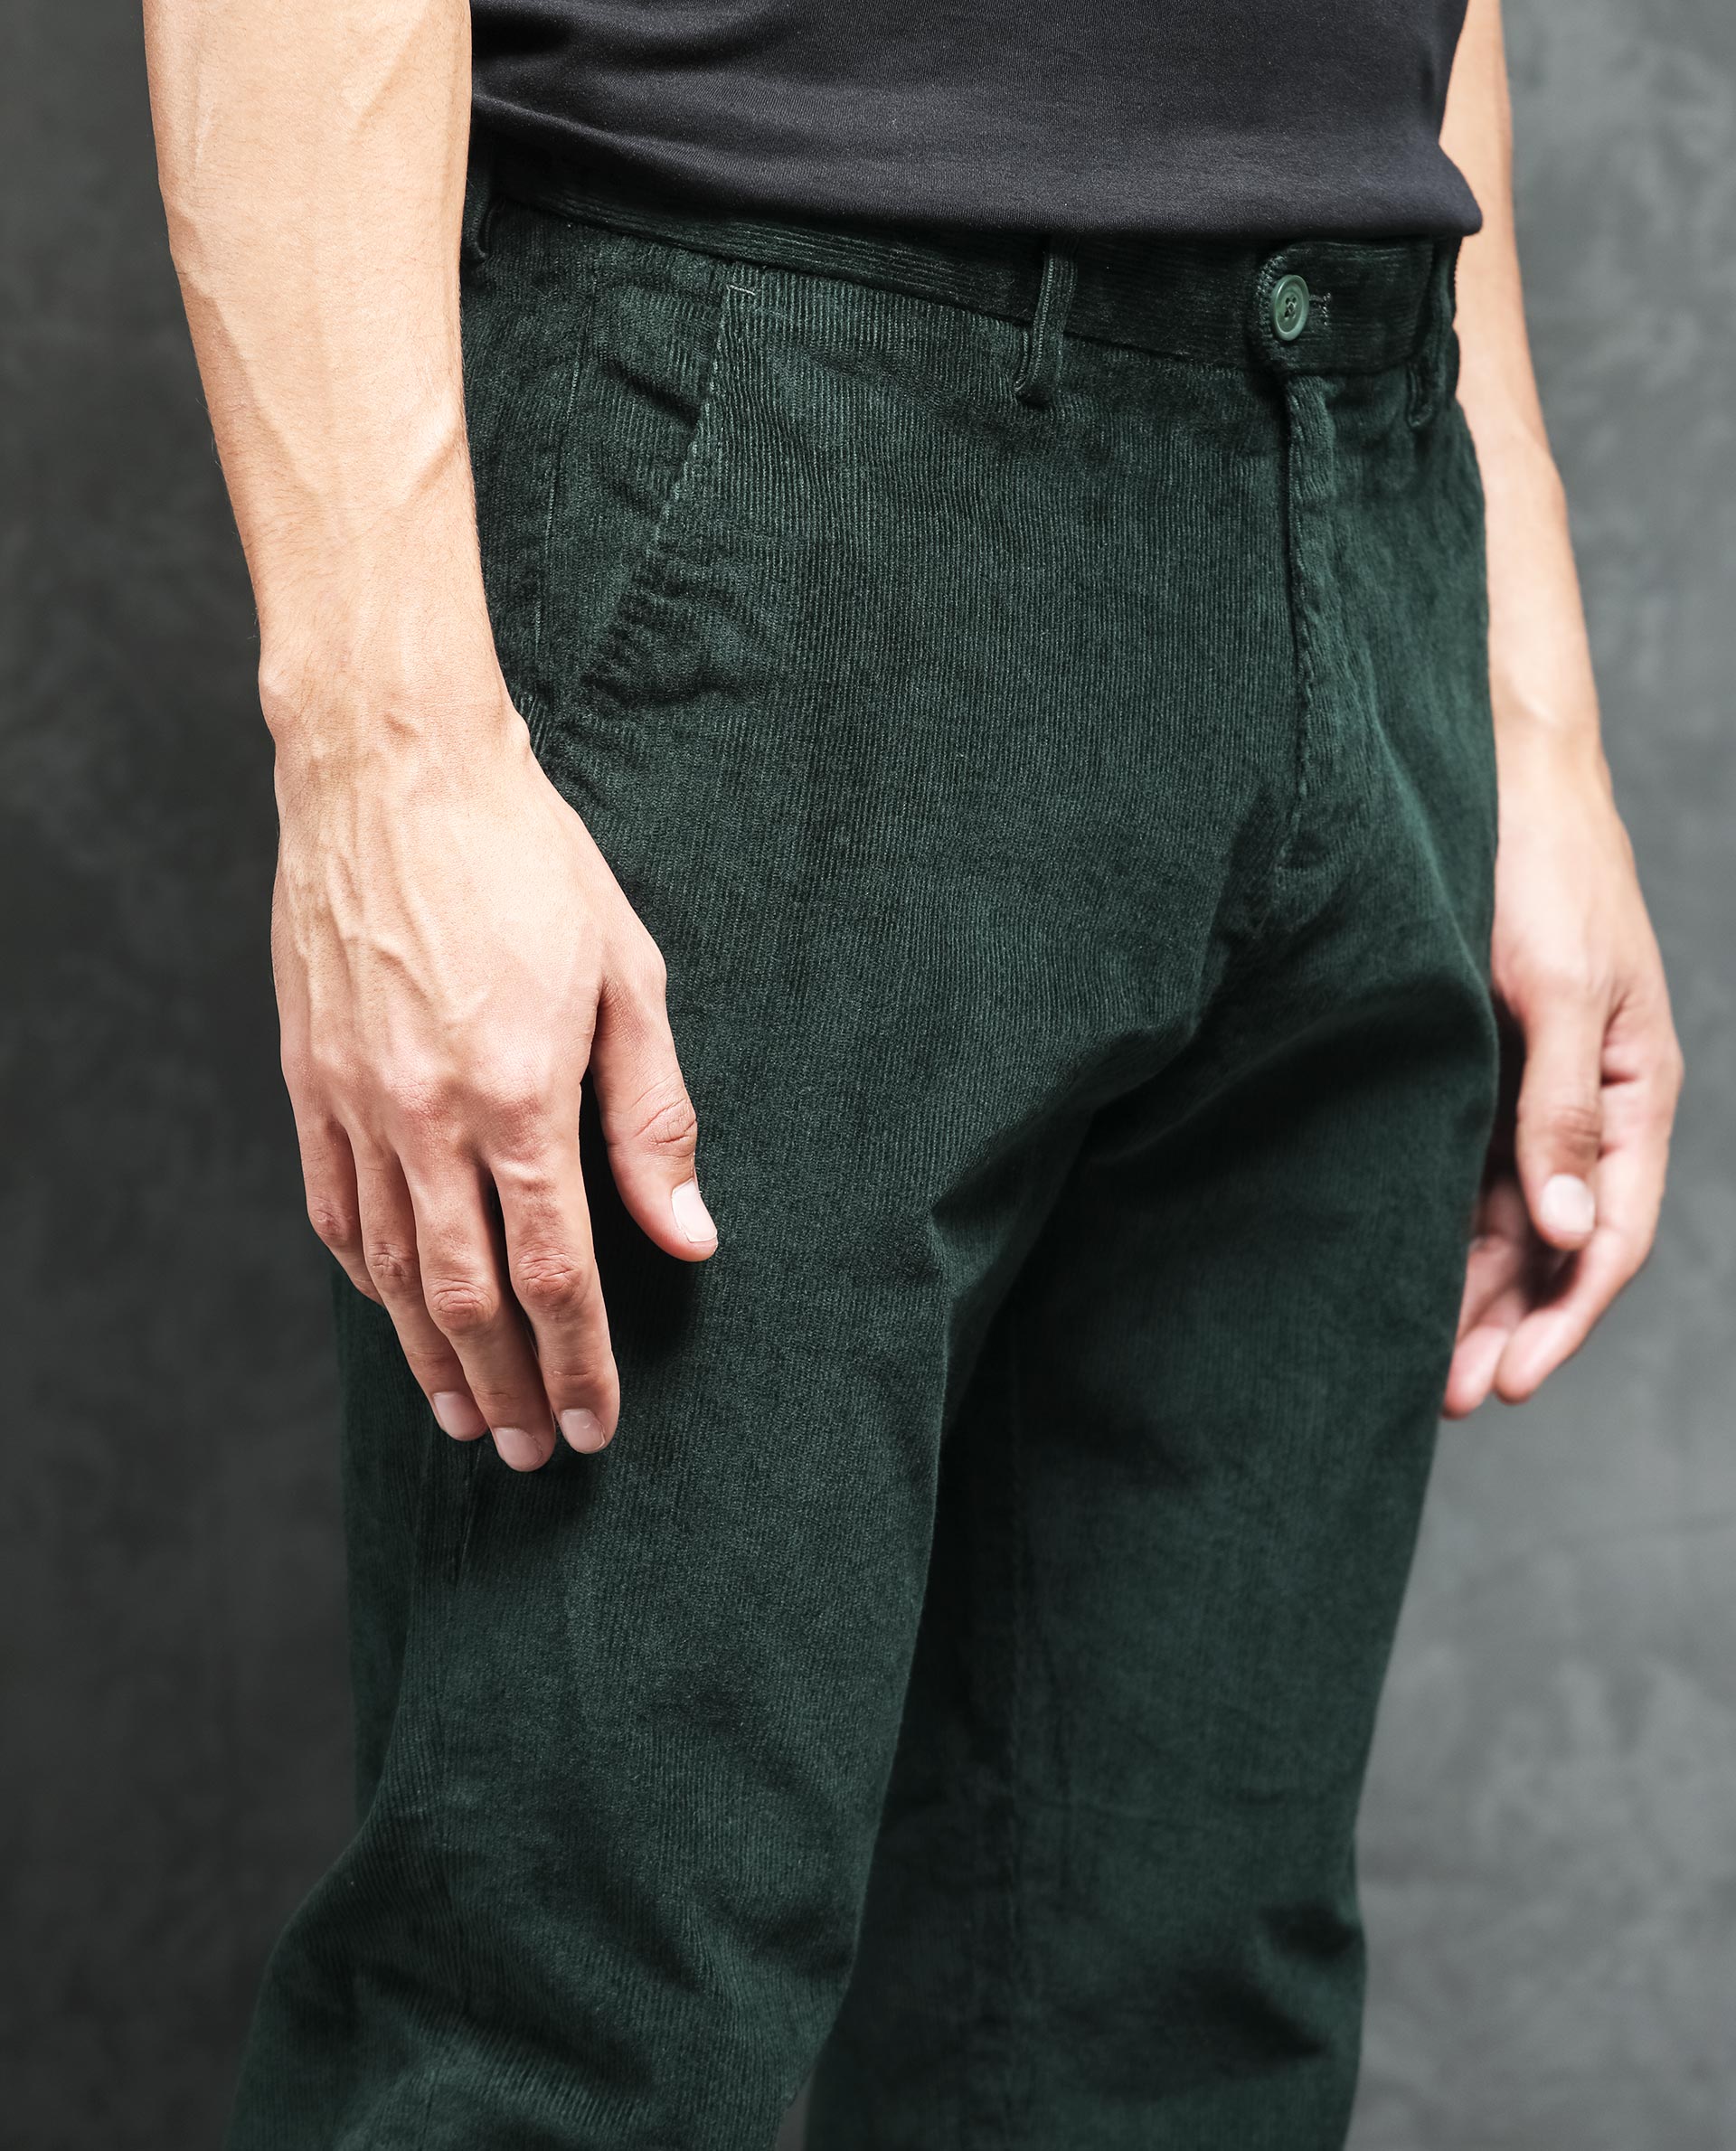 Dark Green Cargo Pants with Black Watch Spring Outfits (4 ideas & outfits)  | Lookastic